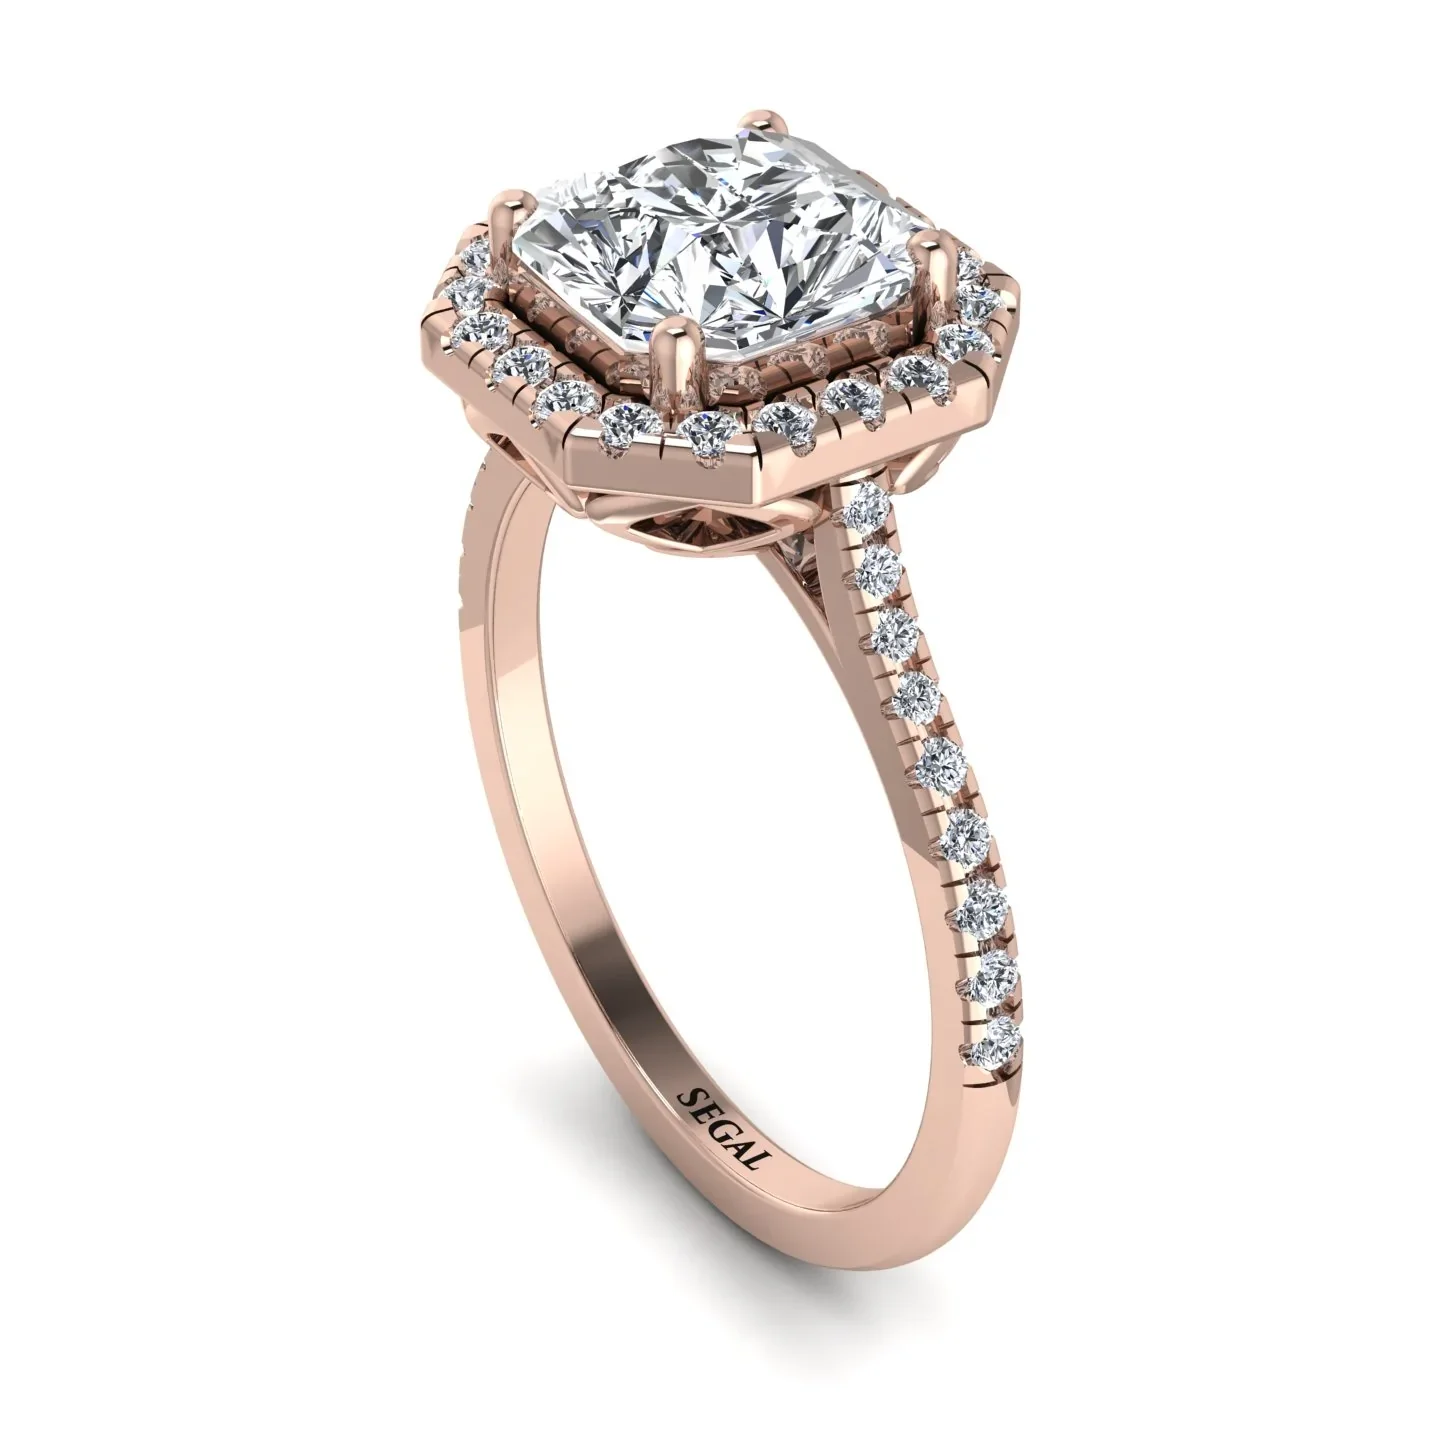 Image of Gorgeous Radiant Cut Diamond Pave Engagement Ring With Hidden Stone - Felicity No. 2